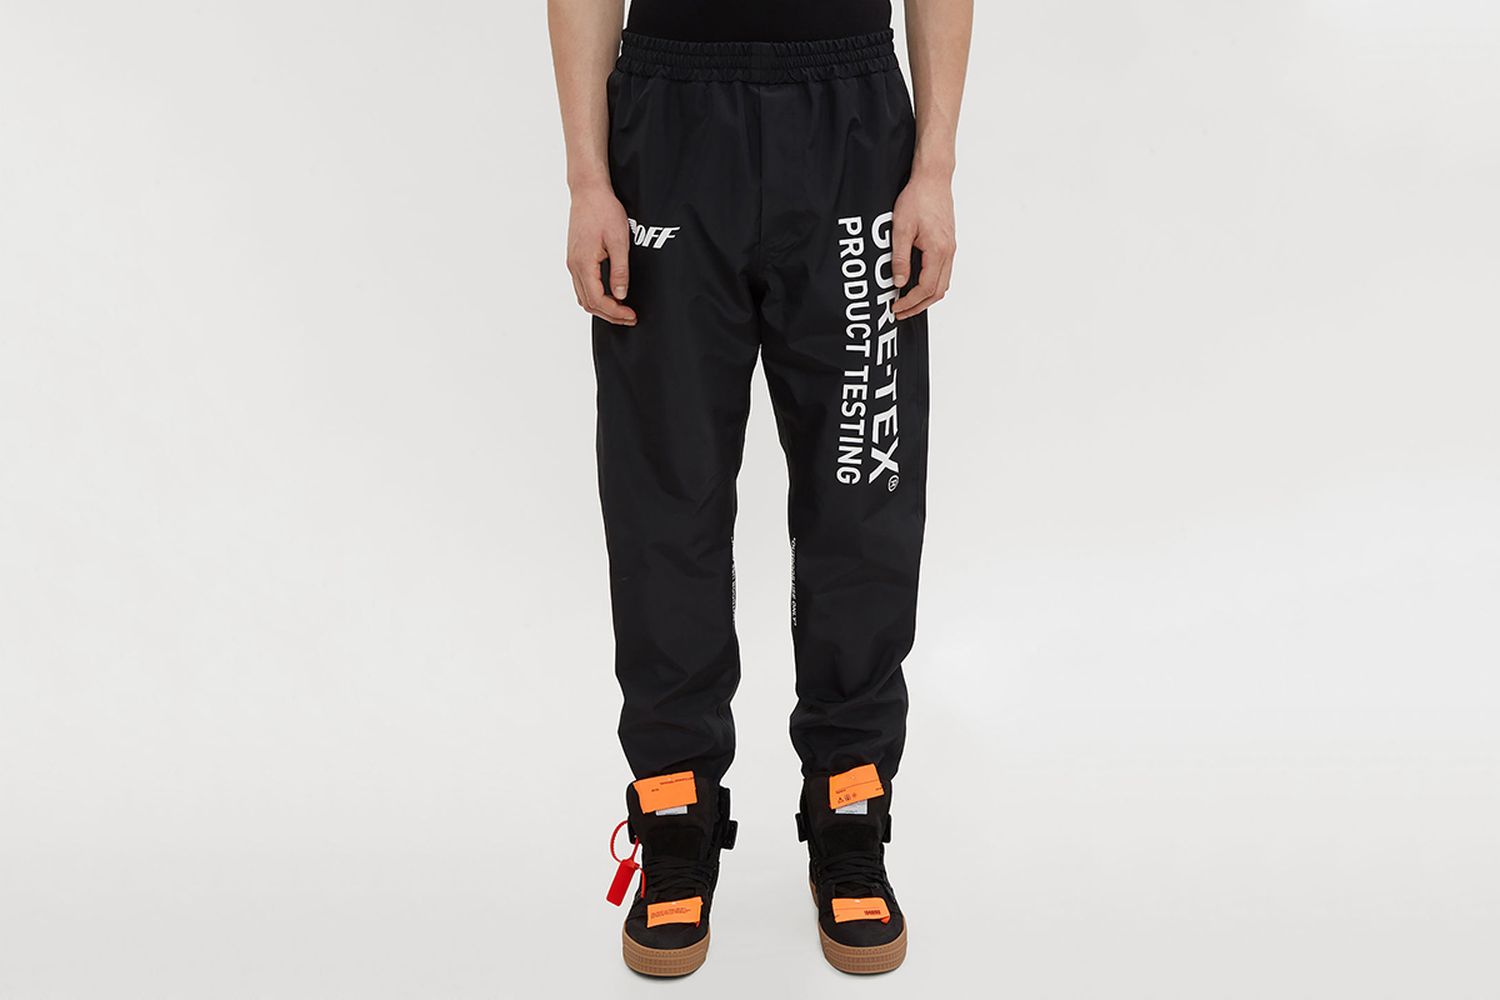 OFF-WHITE x GORE-TEX Collection: Where to Buy Online